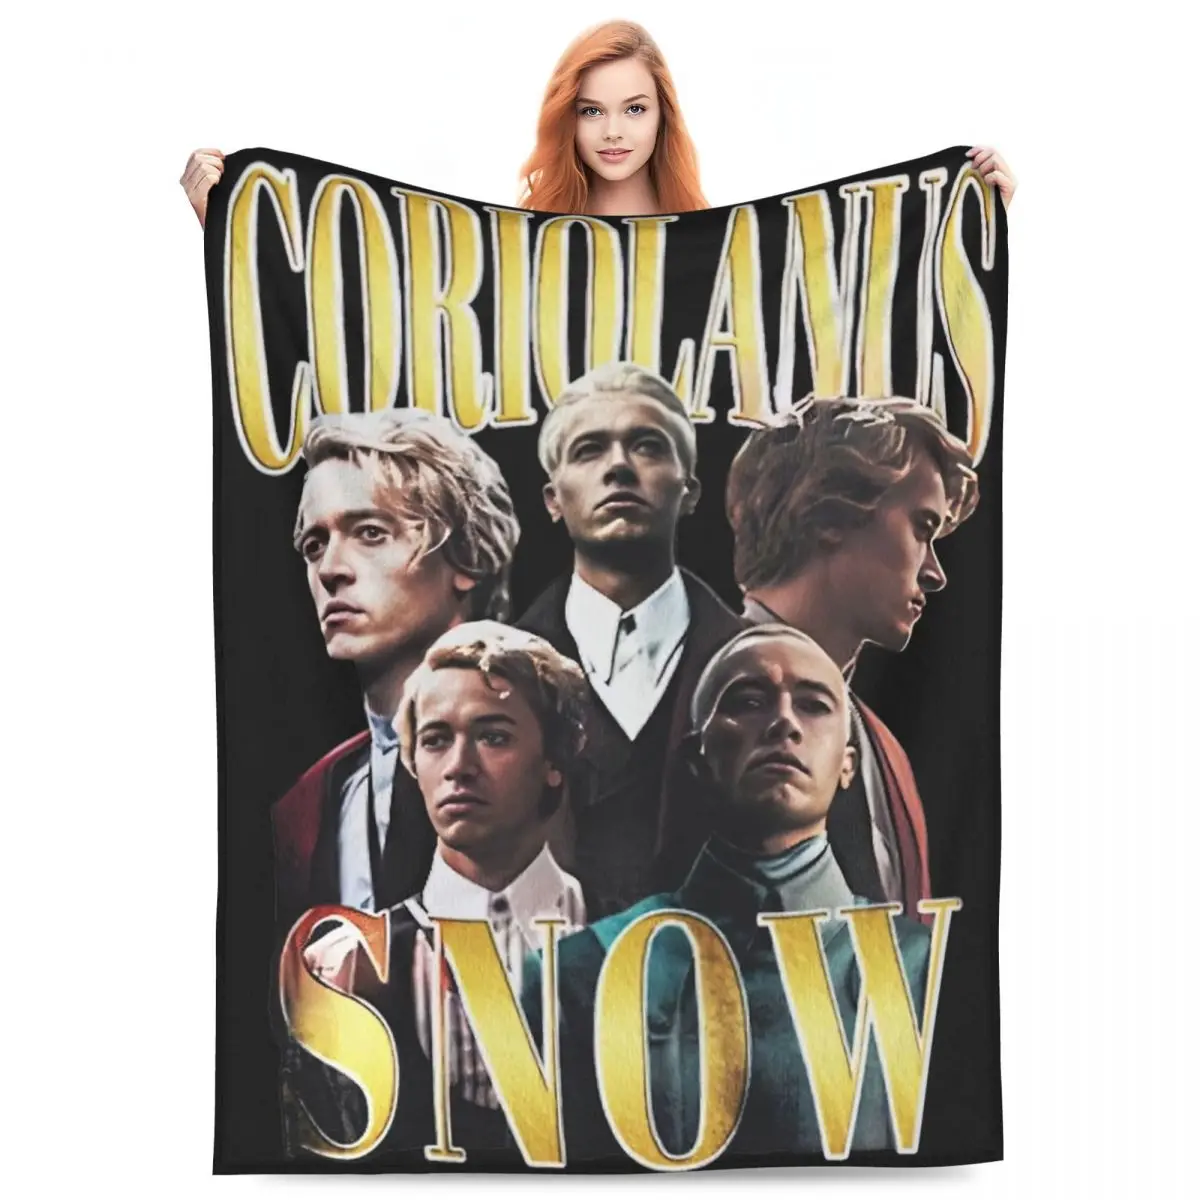 

Relax Coriolanus Snow Bootleg Blanket Home Decorative Tom Blyth Hunger Games Throw Blankets Lightweight Thin Flannel for Travel